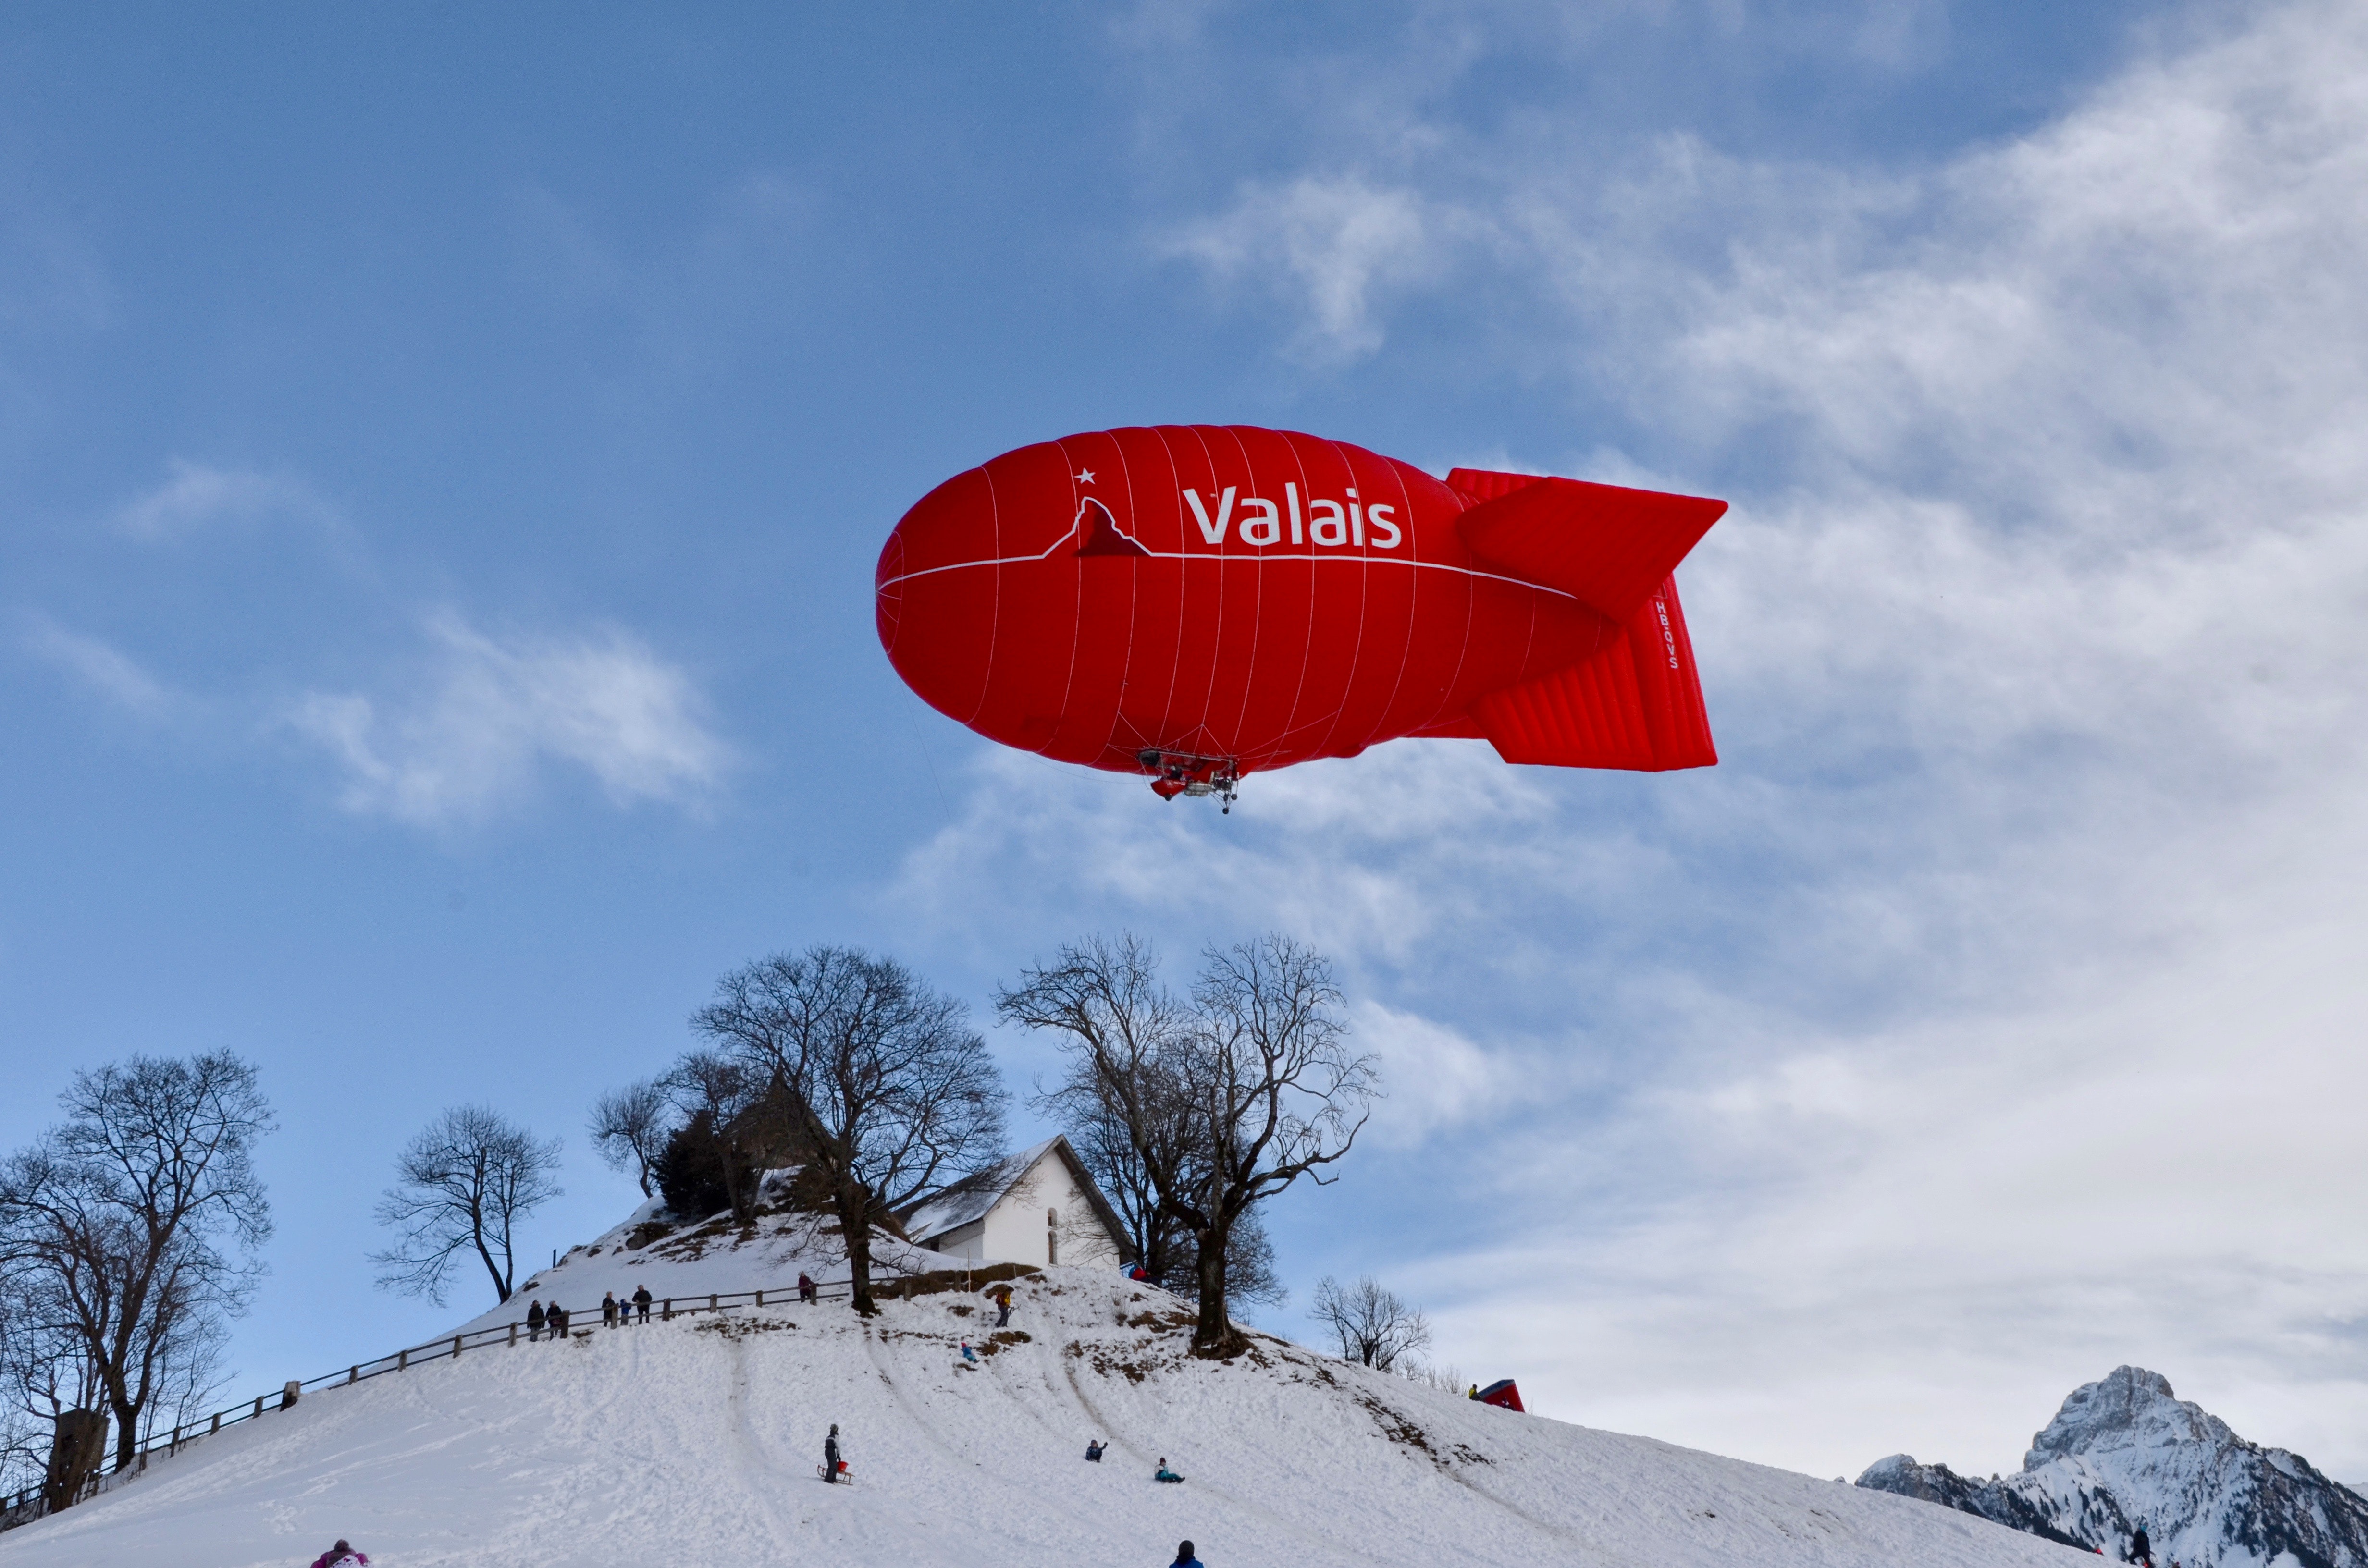 Red valais blimp above white wooden house photo